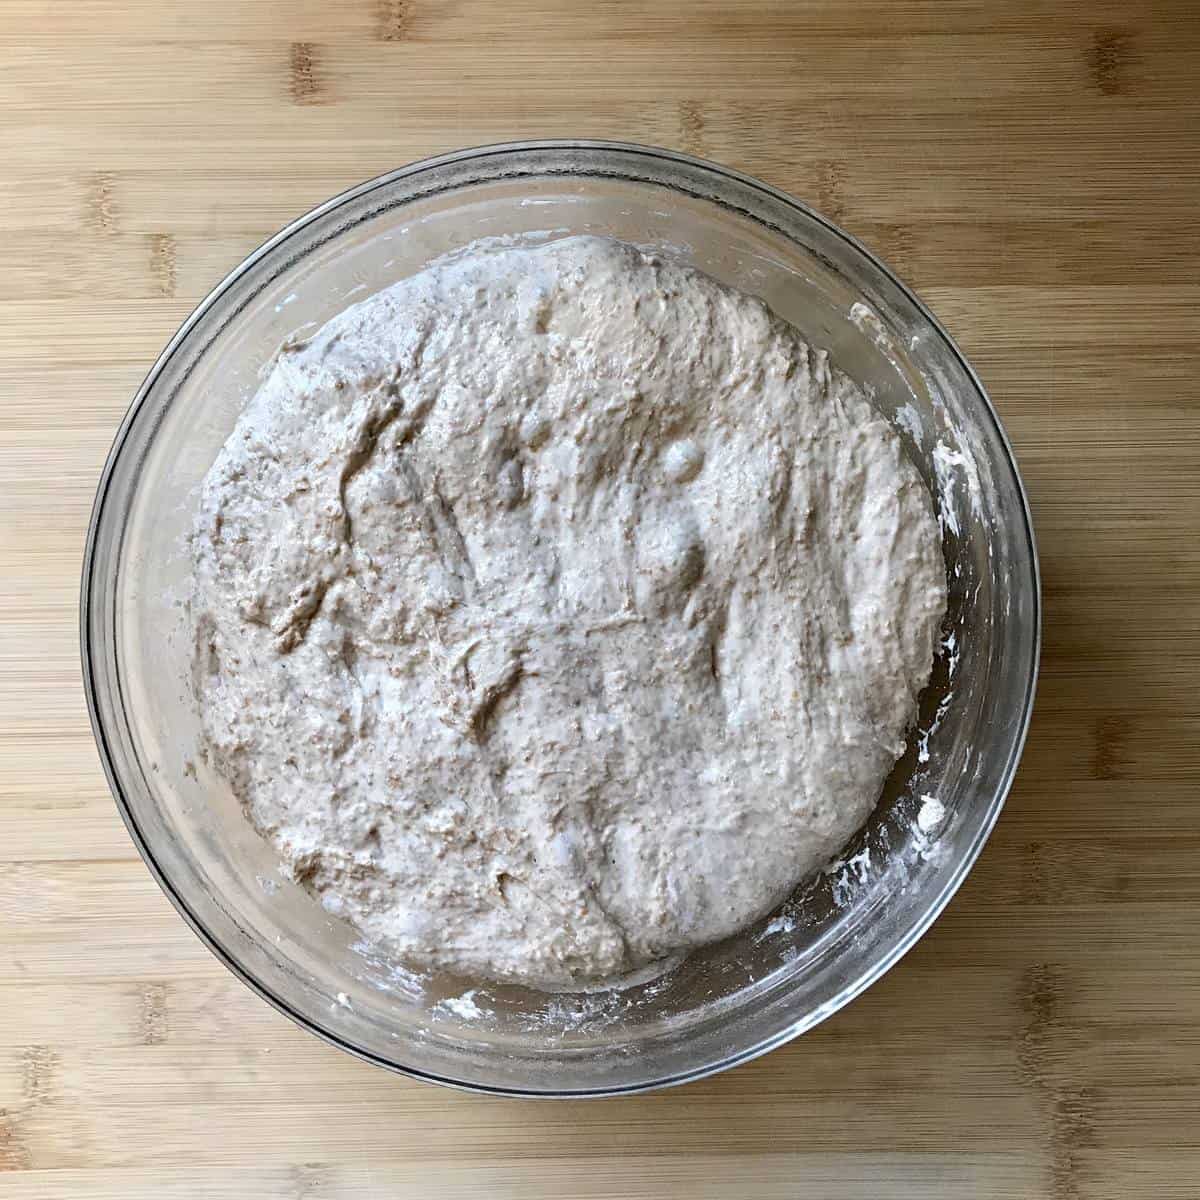 Bubbly whole wheat pizza dough after spending 24 hours in the fridge. 